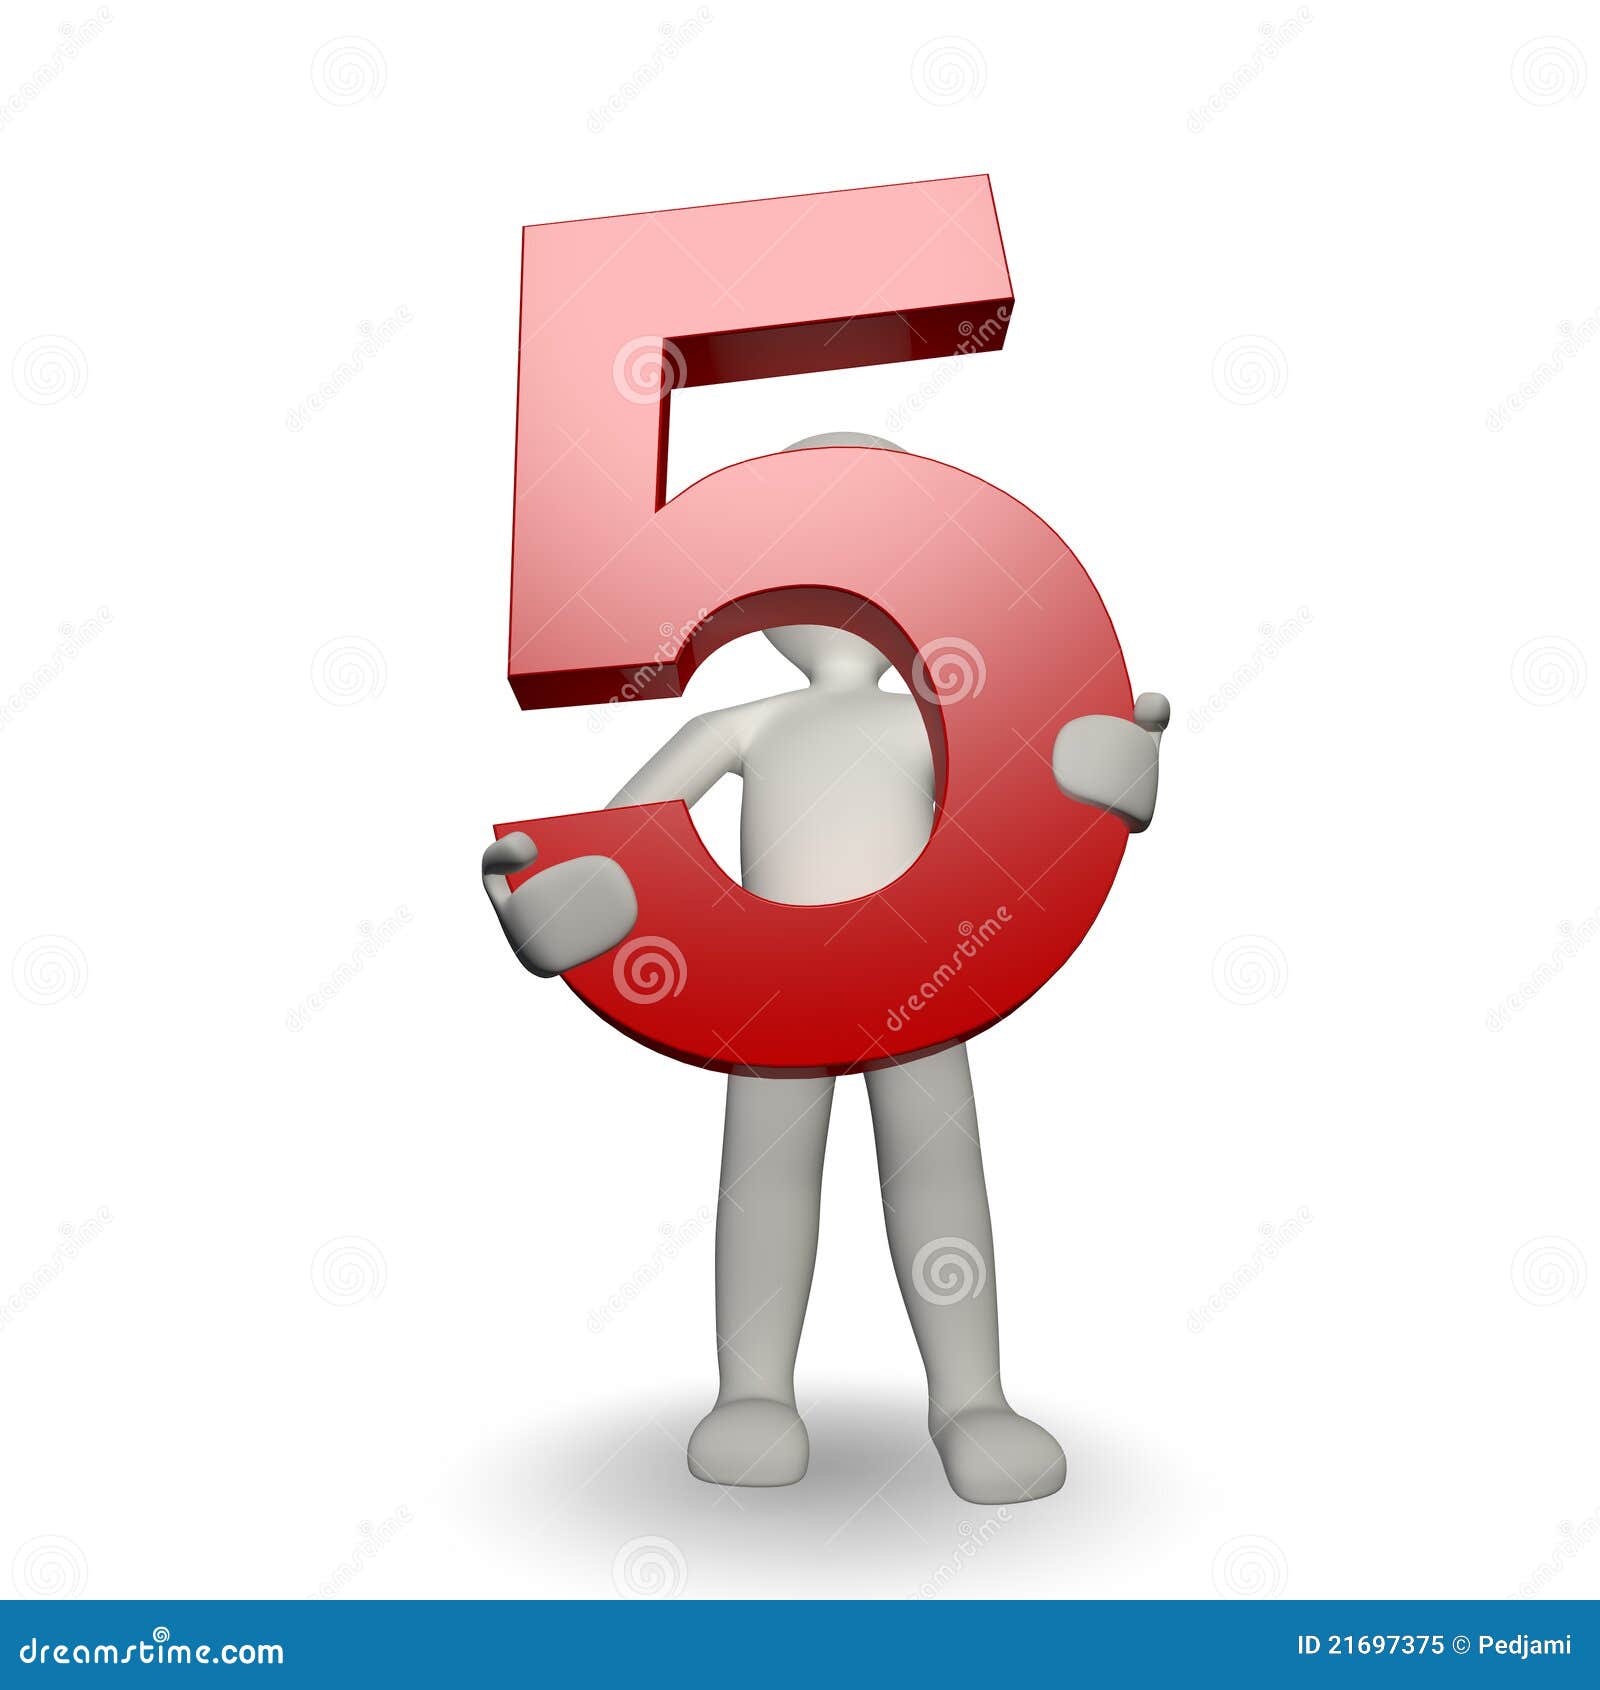 number 5 images red